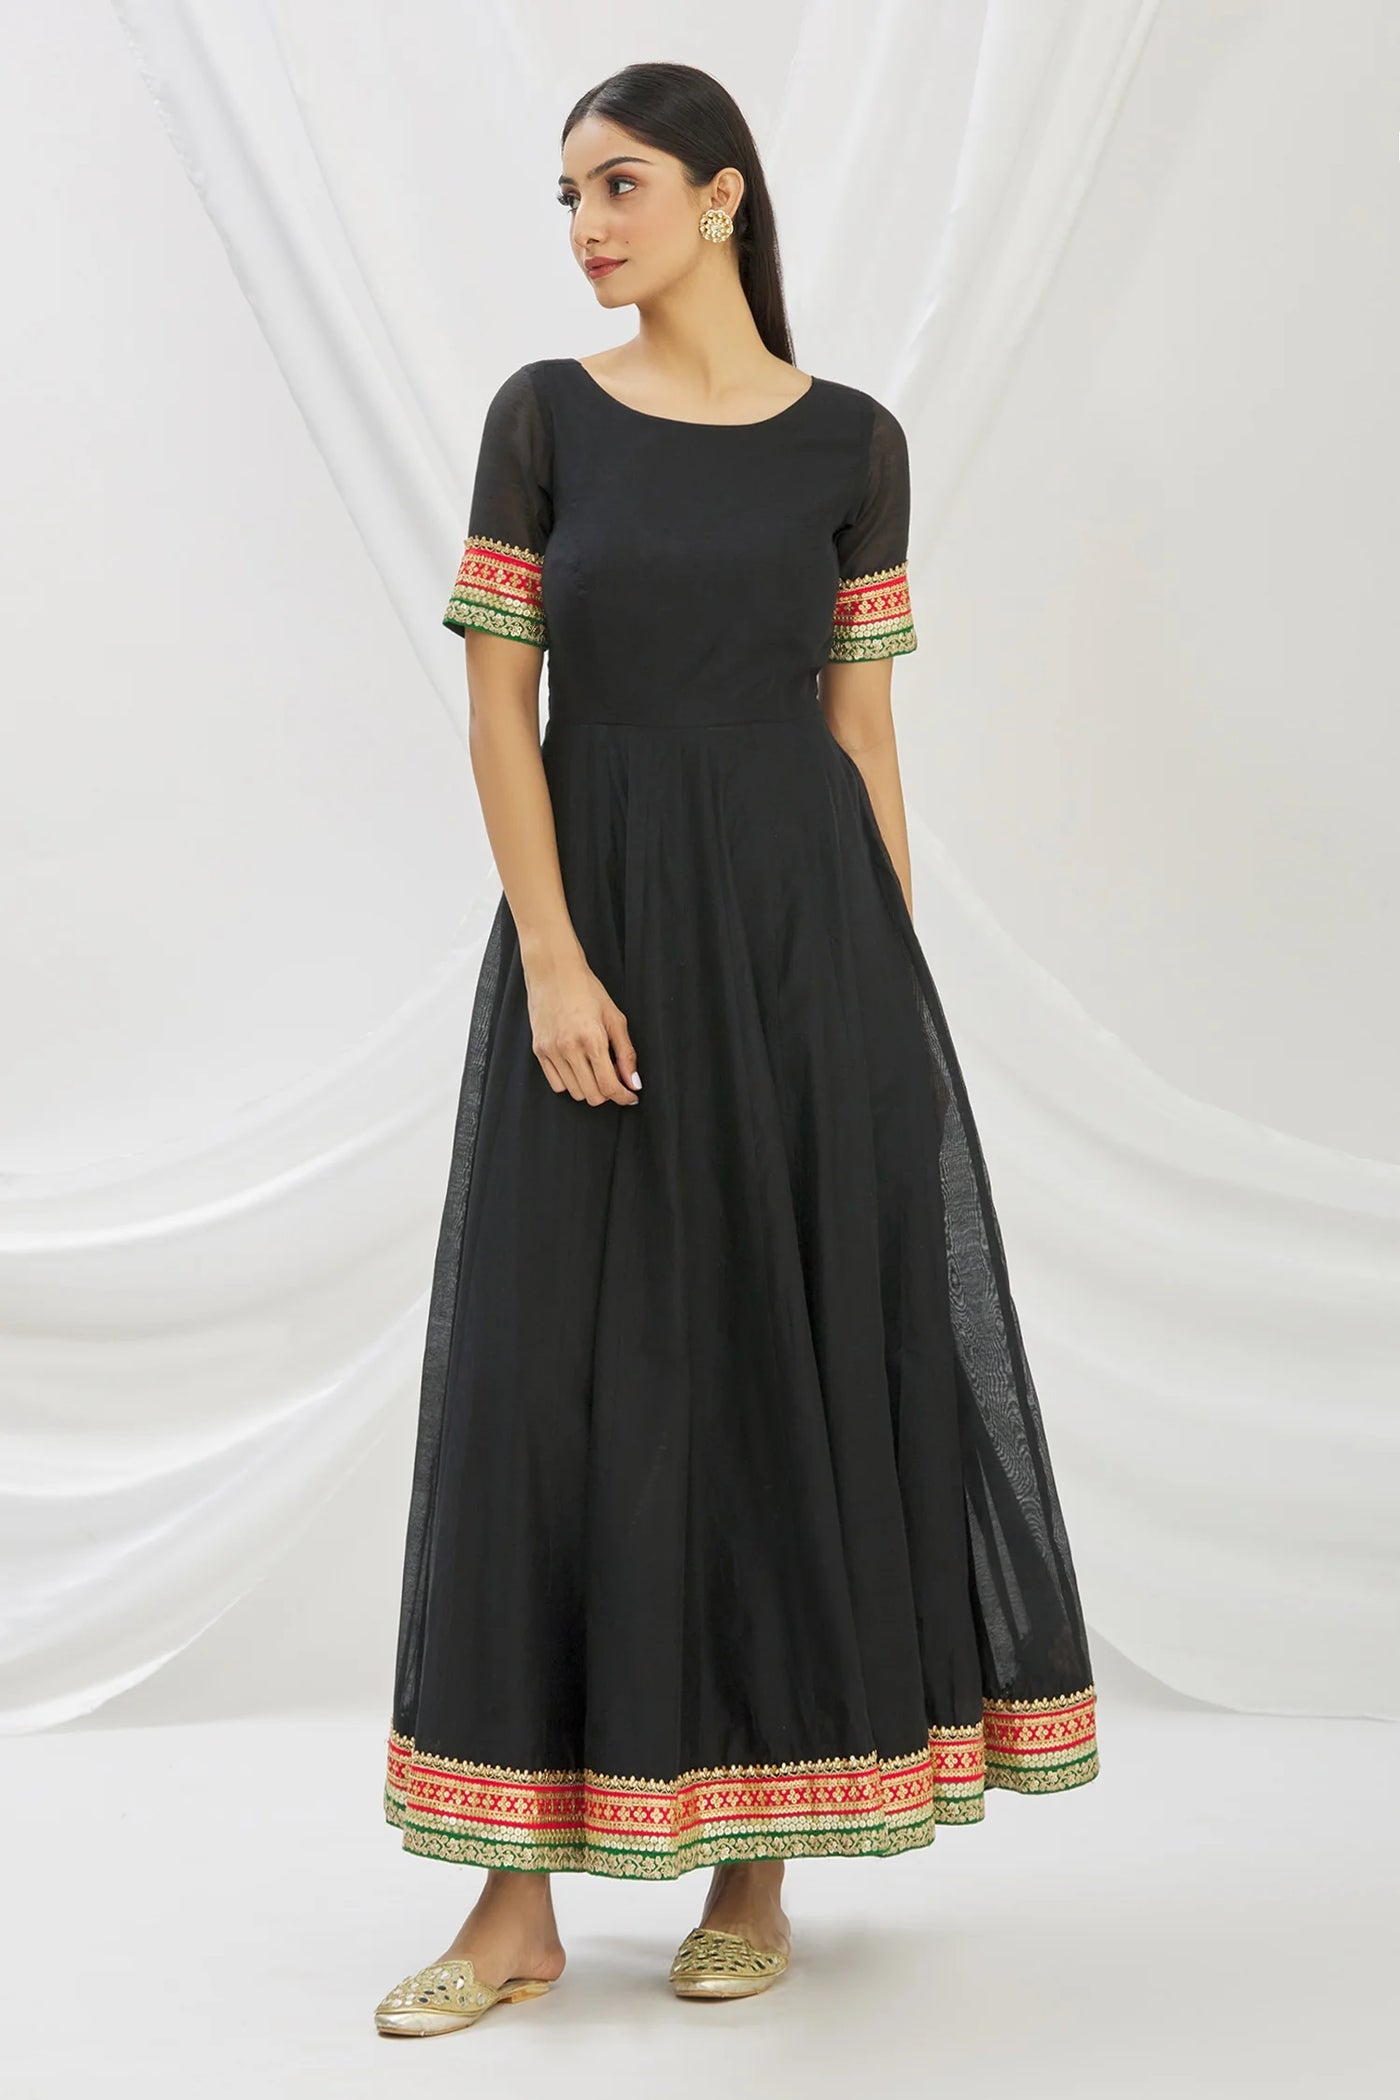 Black Chanderi Anarkali Set Indian Clothing in Denver, CO, Aurora, CO, Boulder, CO, Fort Collins, CO, Colorado Springs, CO, Parker, CO, Highlands Ranch, CO, Cherry Creek, CO, Centennial, CO, and Longmont, CO. NATIONWIDE SHIPPING USA- India Fashion X